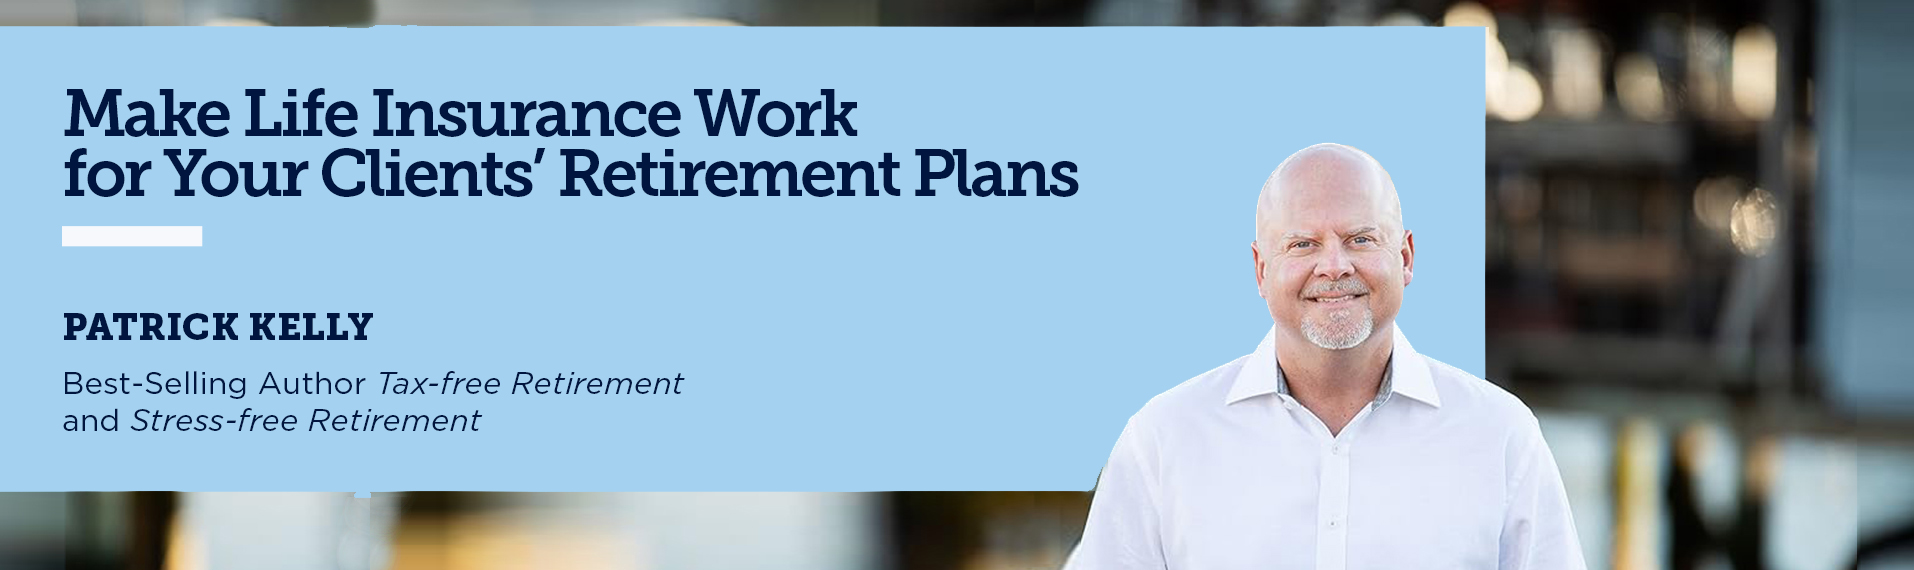 Make Life Insurance Work for Your Clients’ Retirement Plans with Patrick Kelly